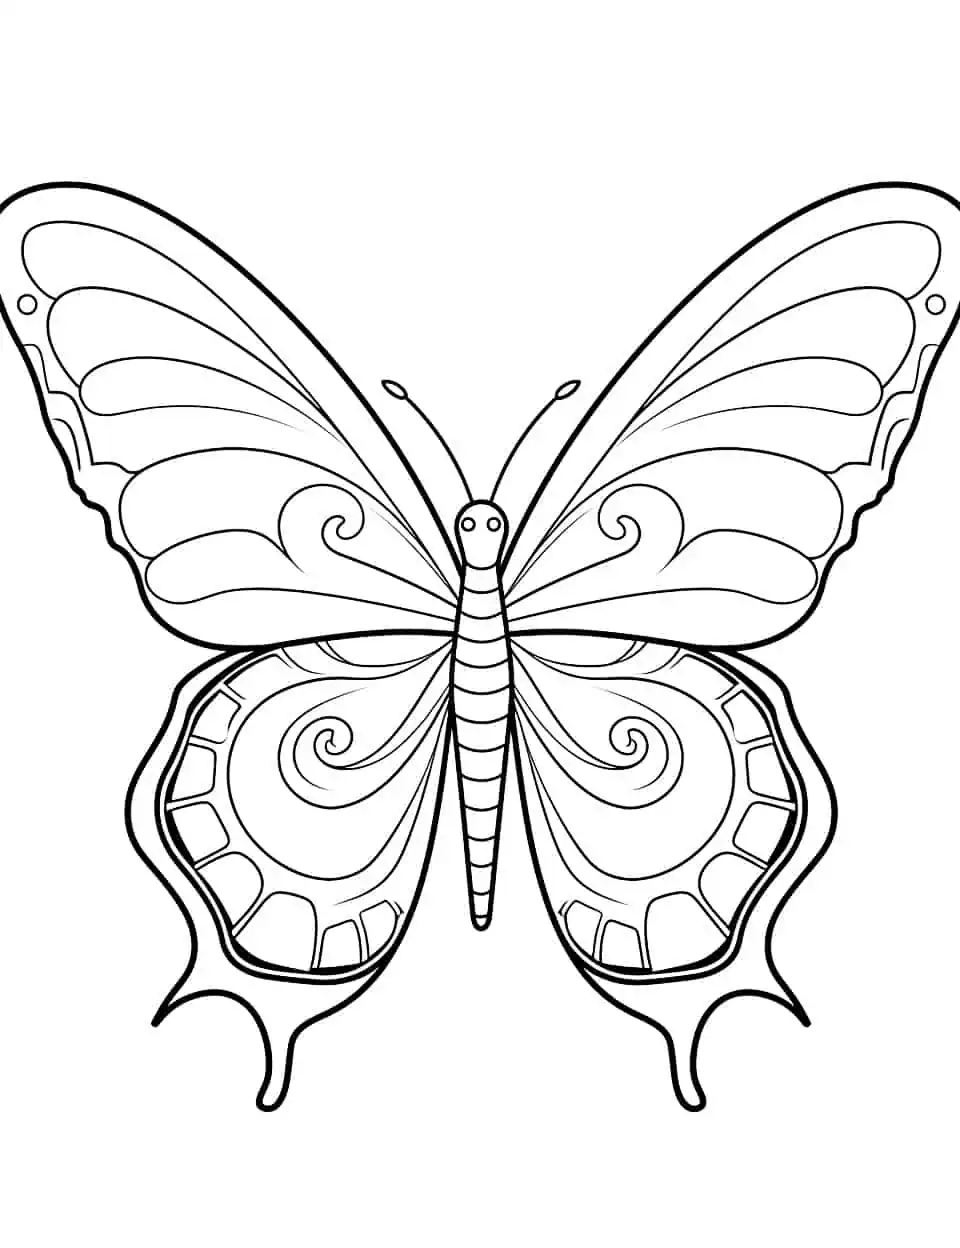 Graceful Gradients Butterfly Coloring Page - A coloring page featuring a butterfly with beautiful gradients and shading.